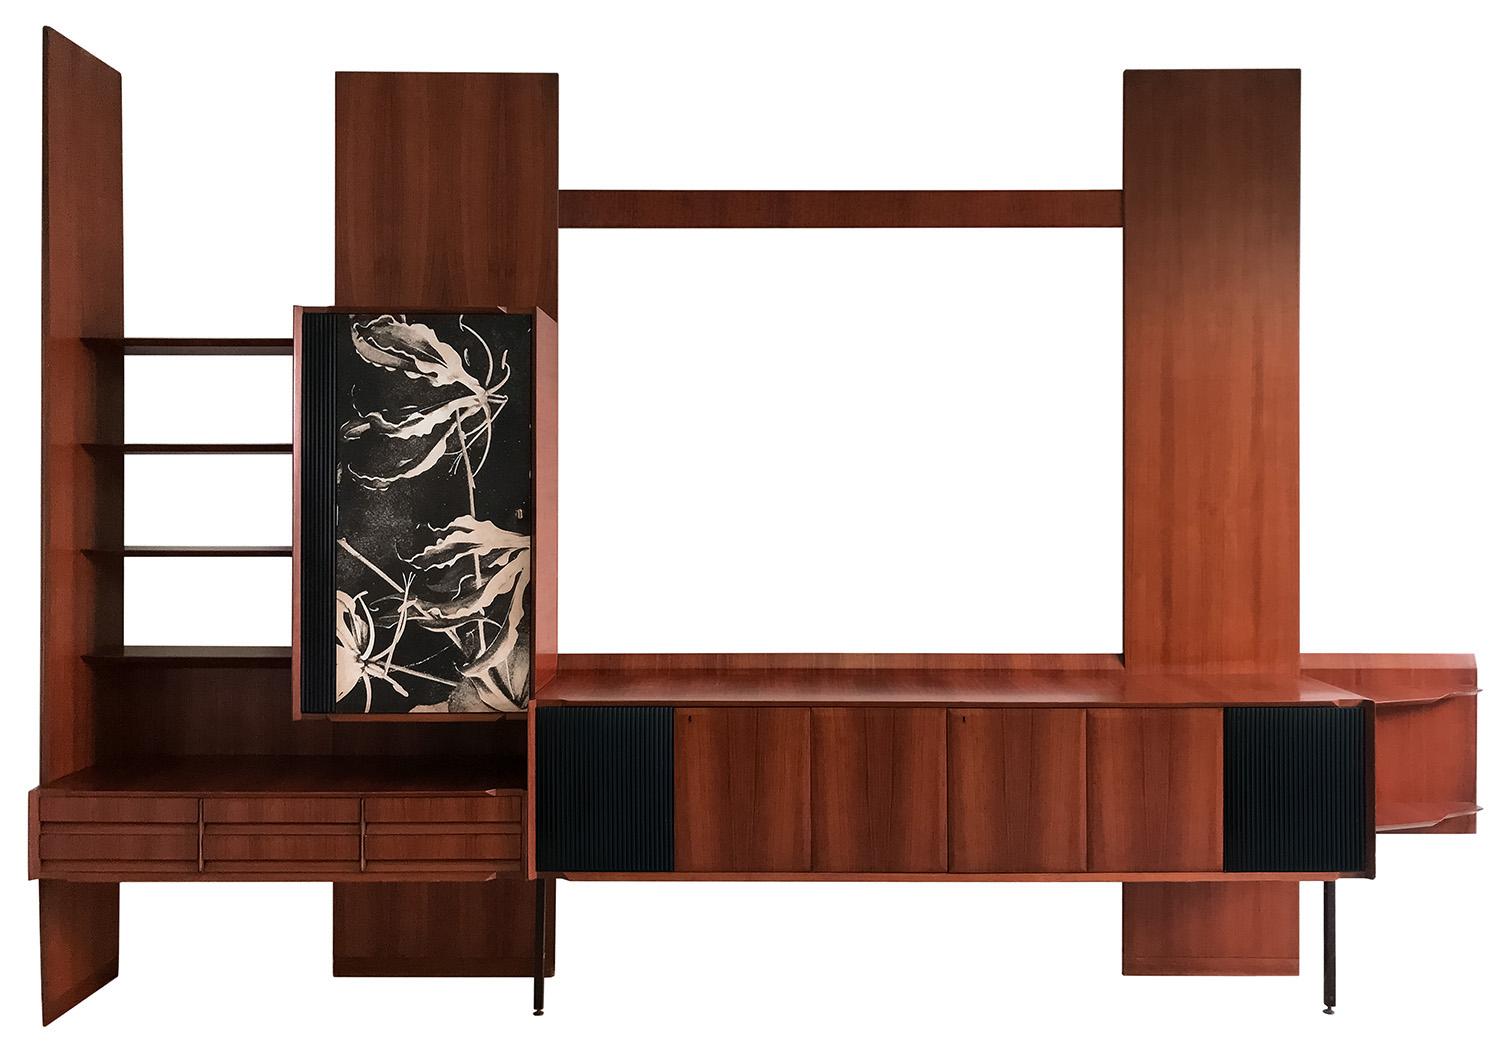 This is a Wall Unit well designed by Vittorio Dassi in the 1950s.
It offers plenty of storage space with several compartments, hinged doors, drawers and open shelves and it would be a great addition to any modern interior decor as home as well for